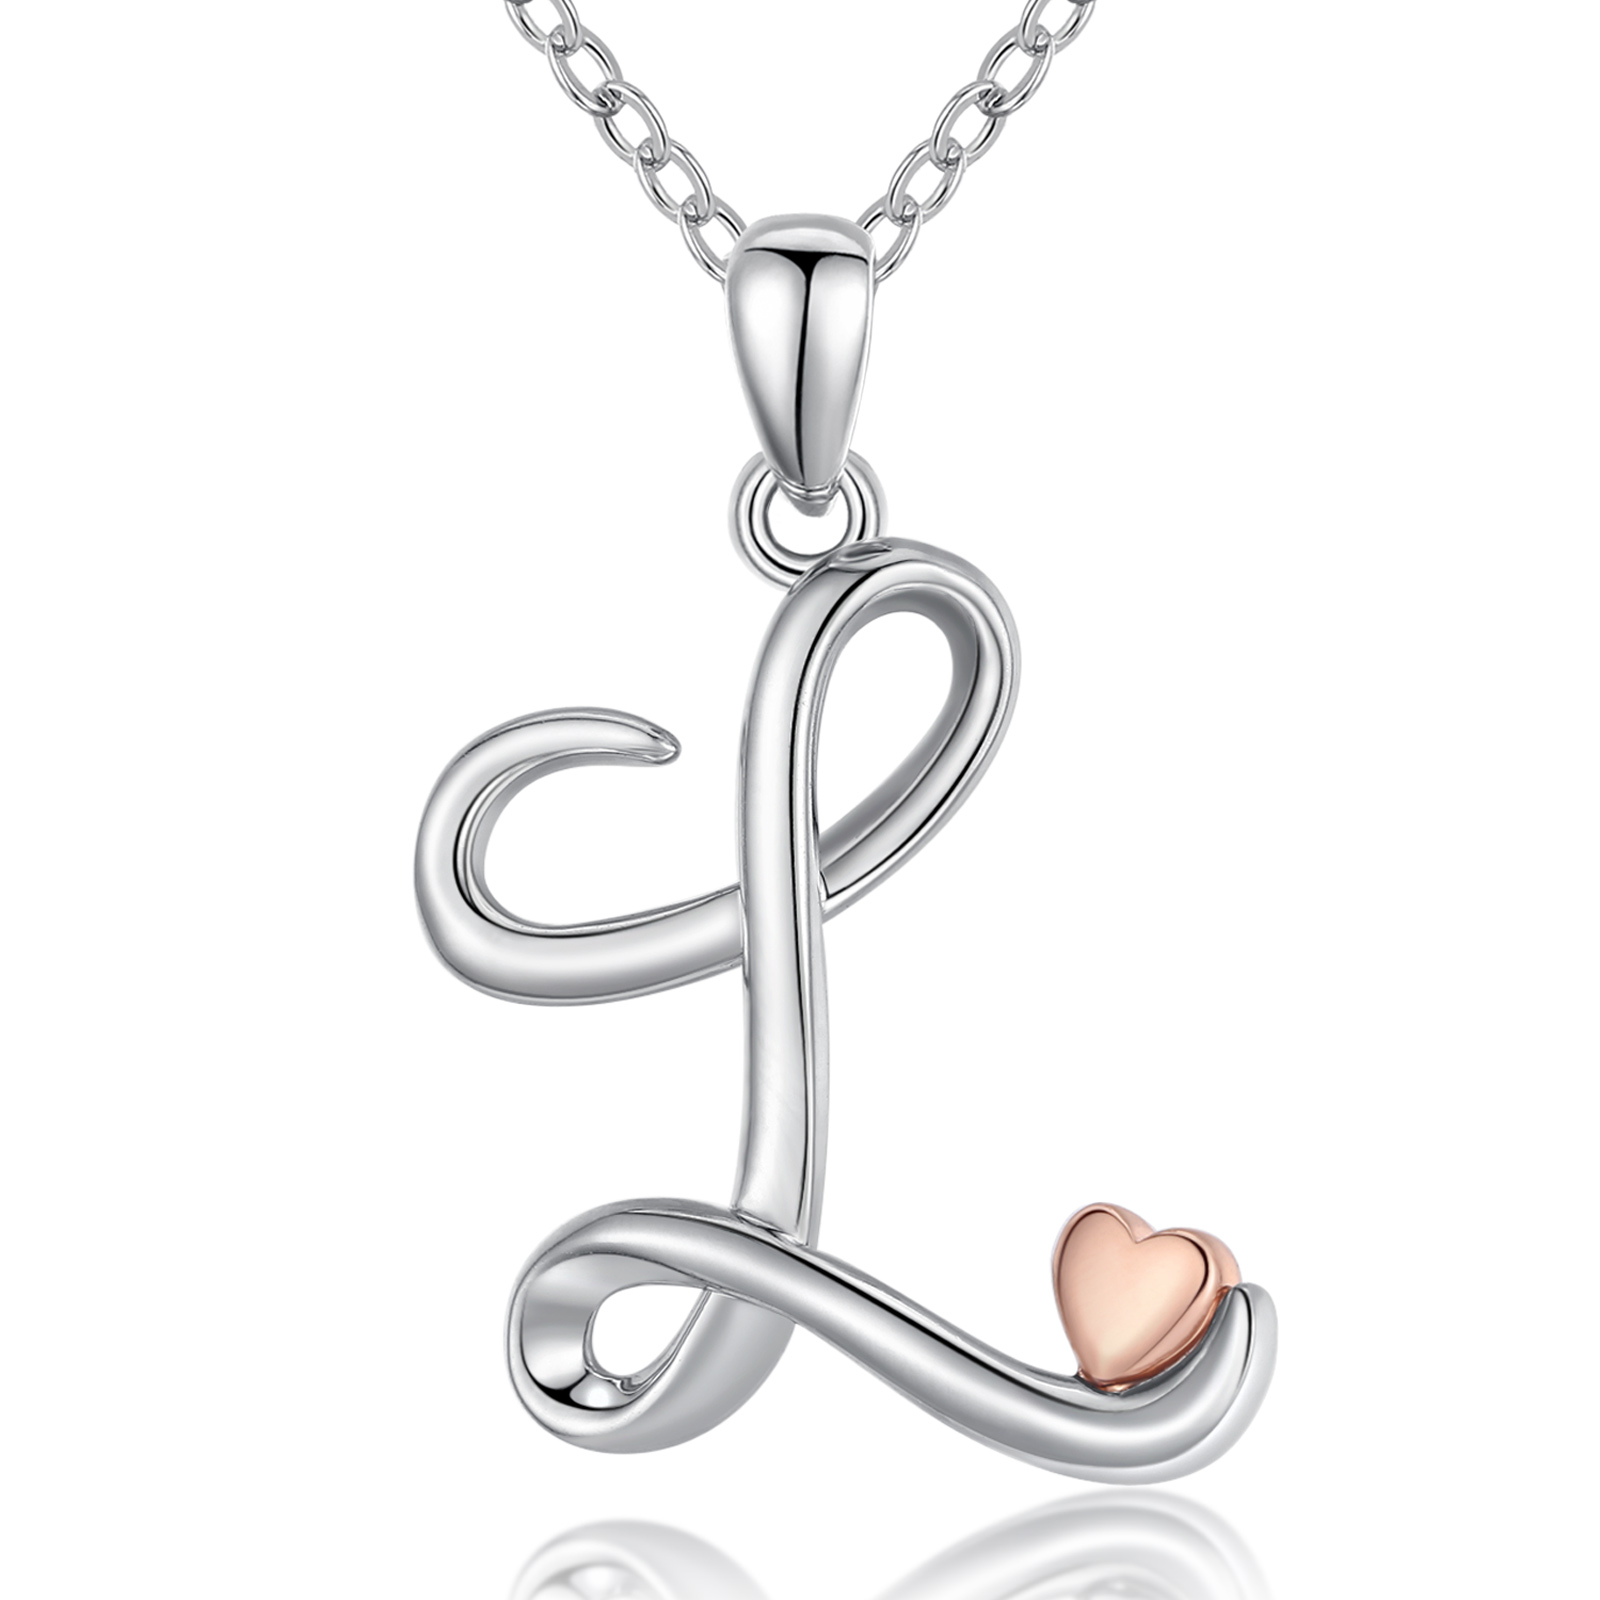 Merryshine Jewelry handmade s925 sterling silver plated rhodium initial necklace letter L pendant for women